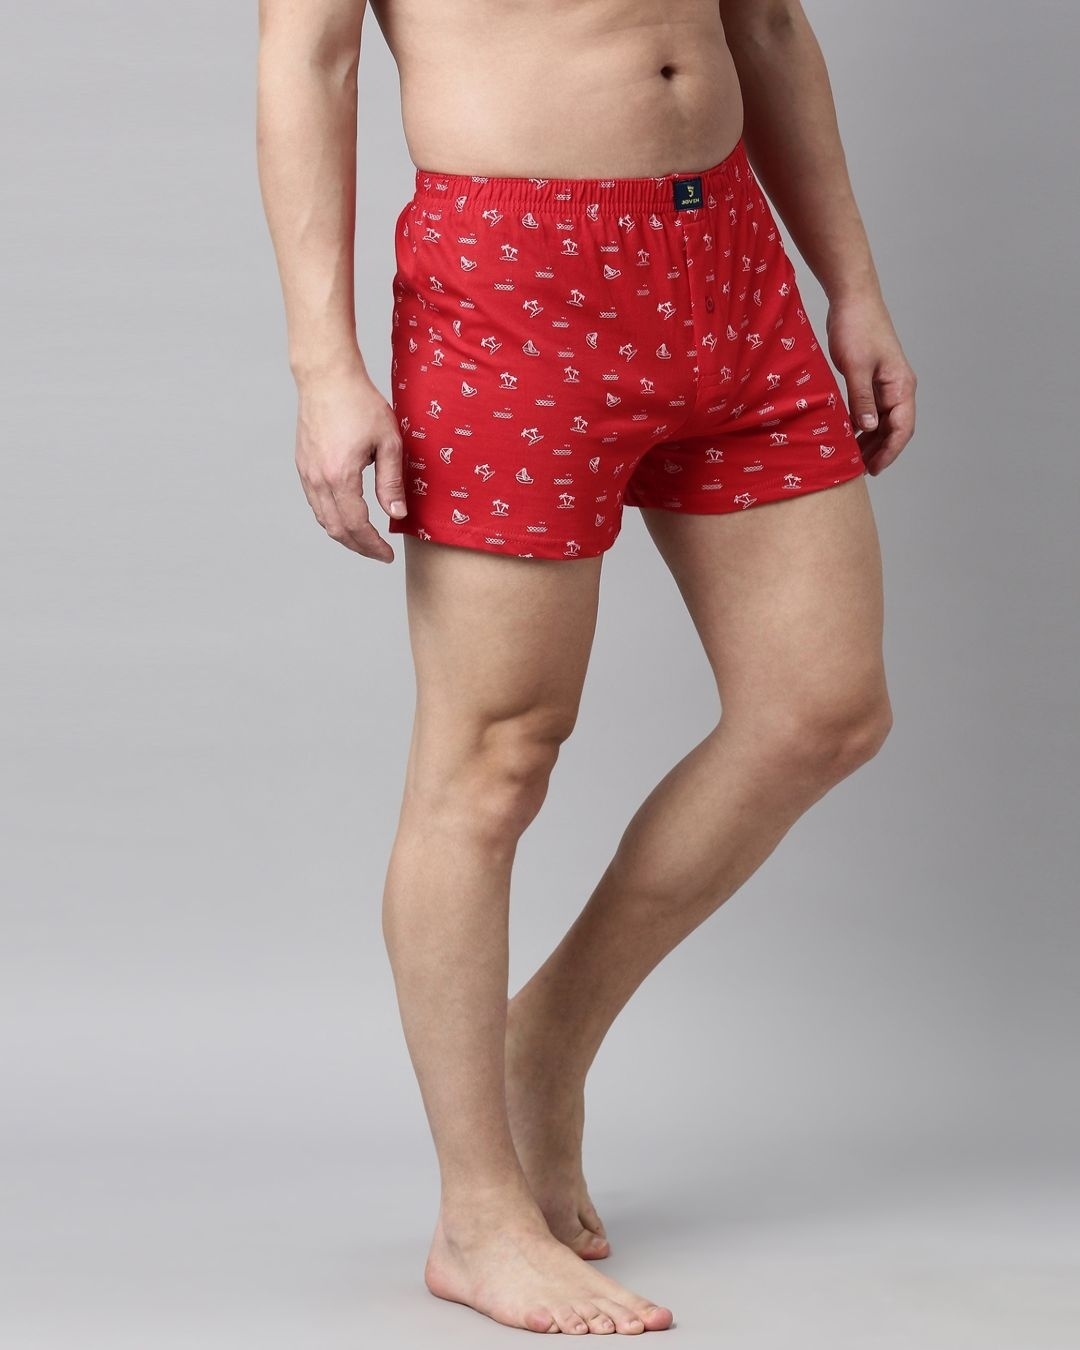 Shop Red Printed Knitted Men's Boxer-Design